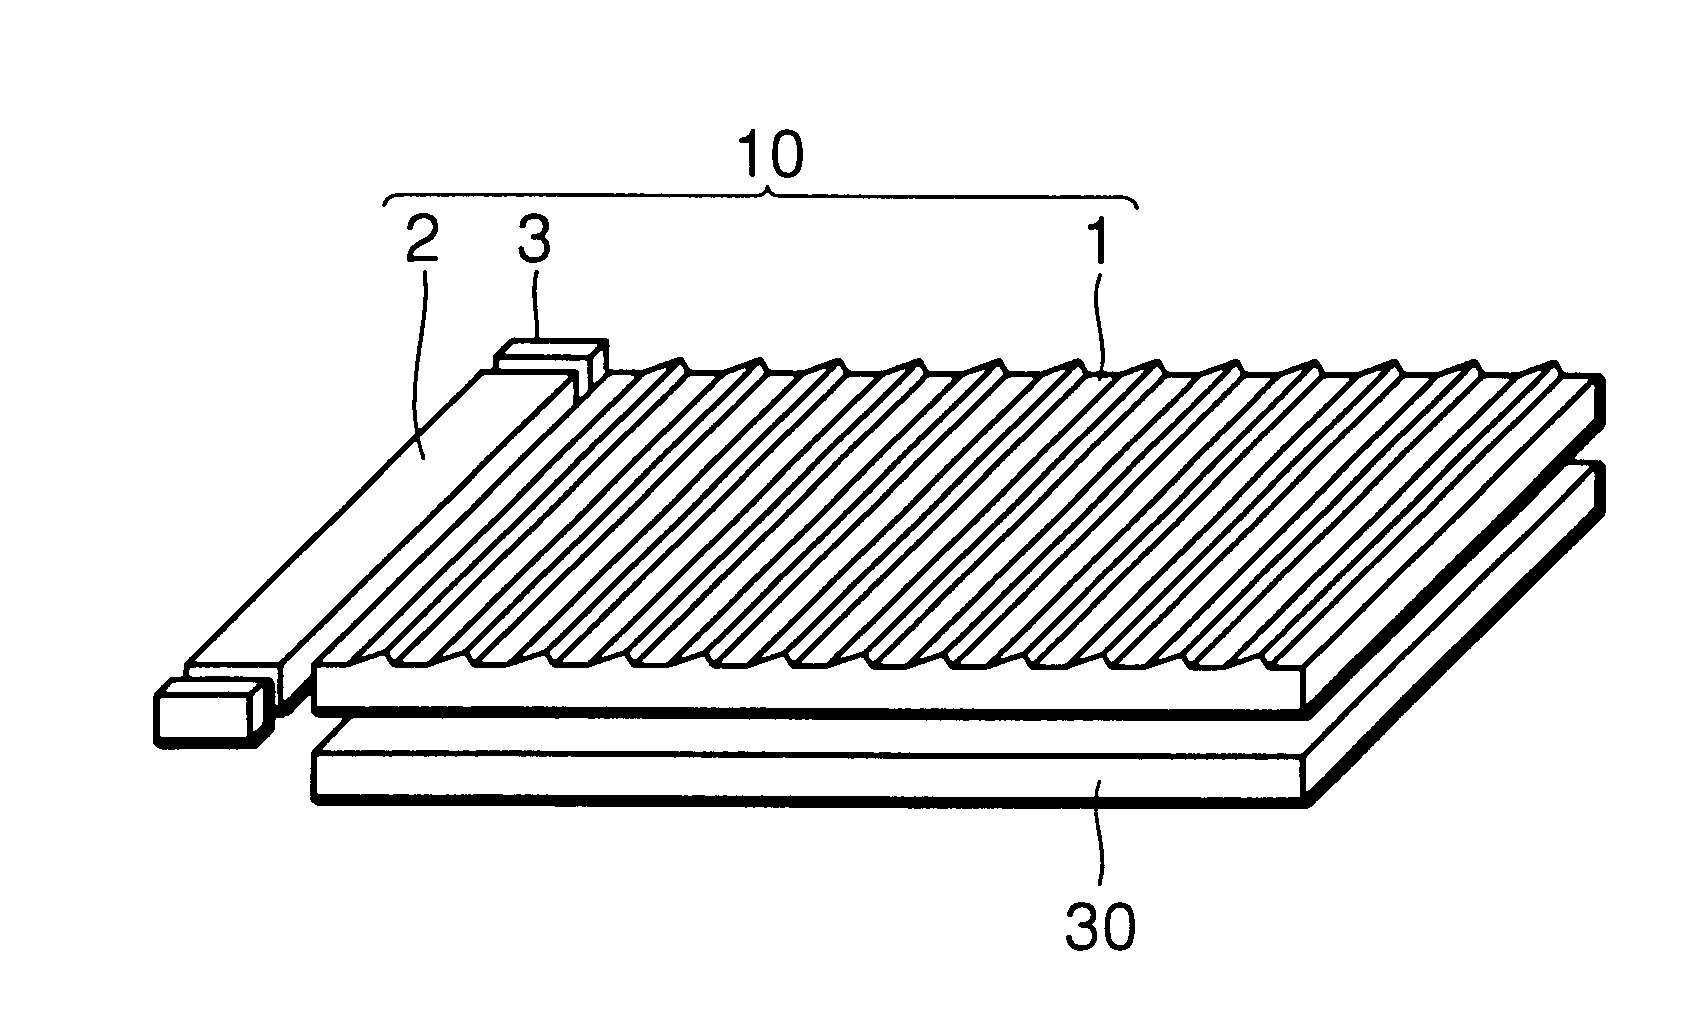 Front light, reflective liquid crystal display device and personal digital assistant